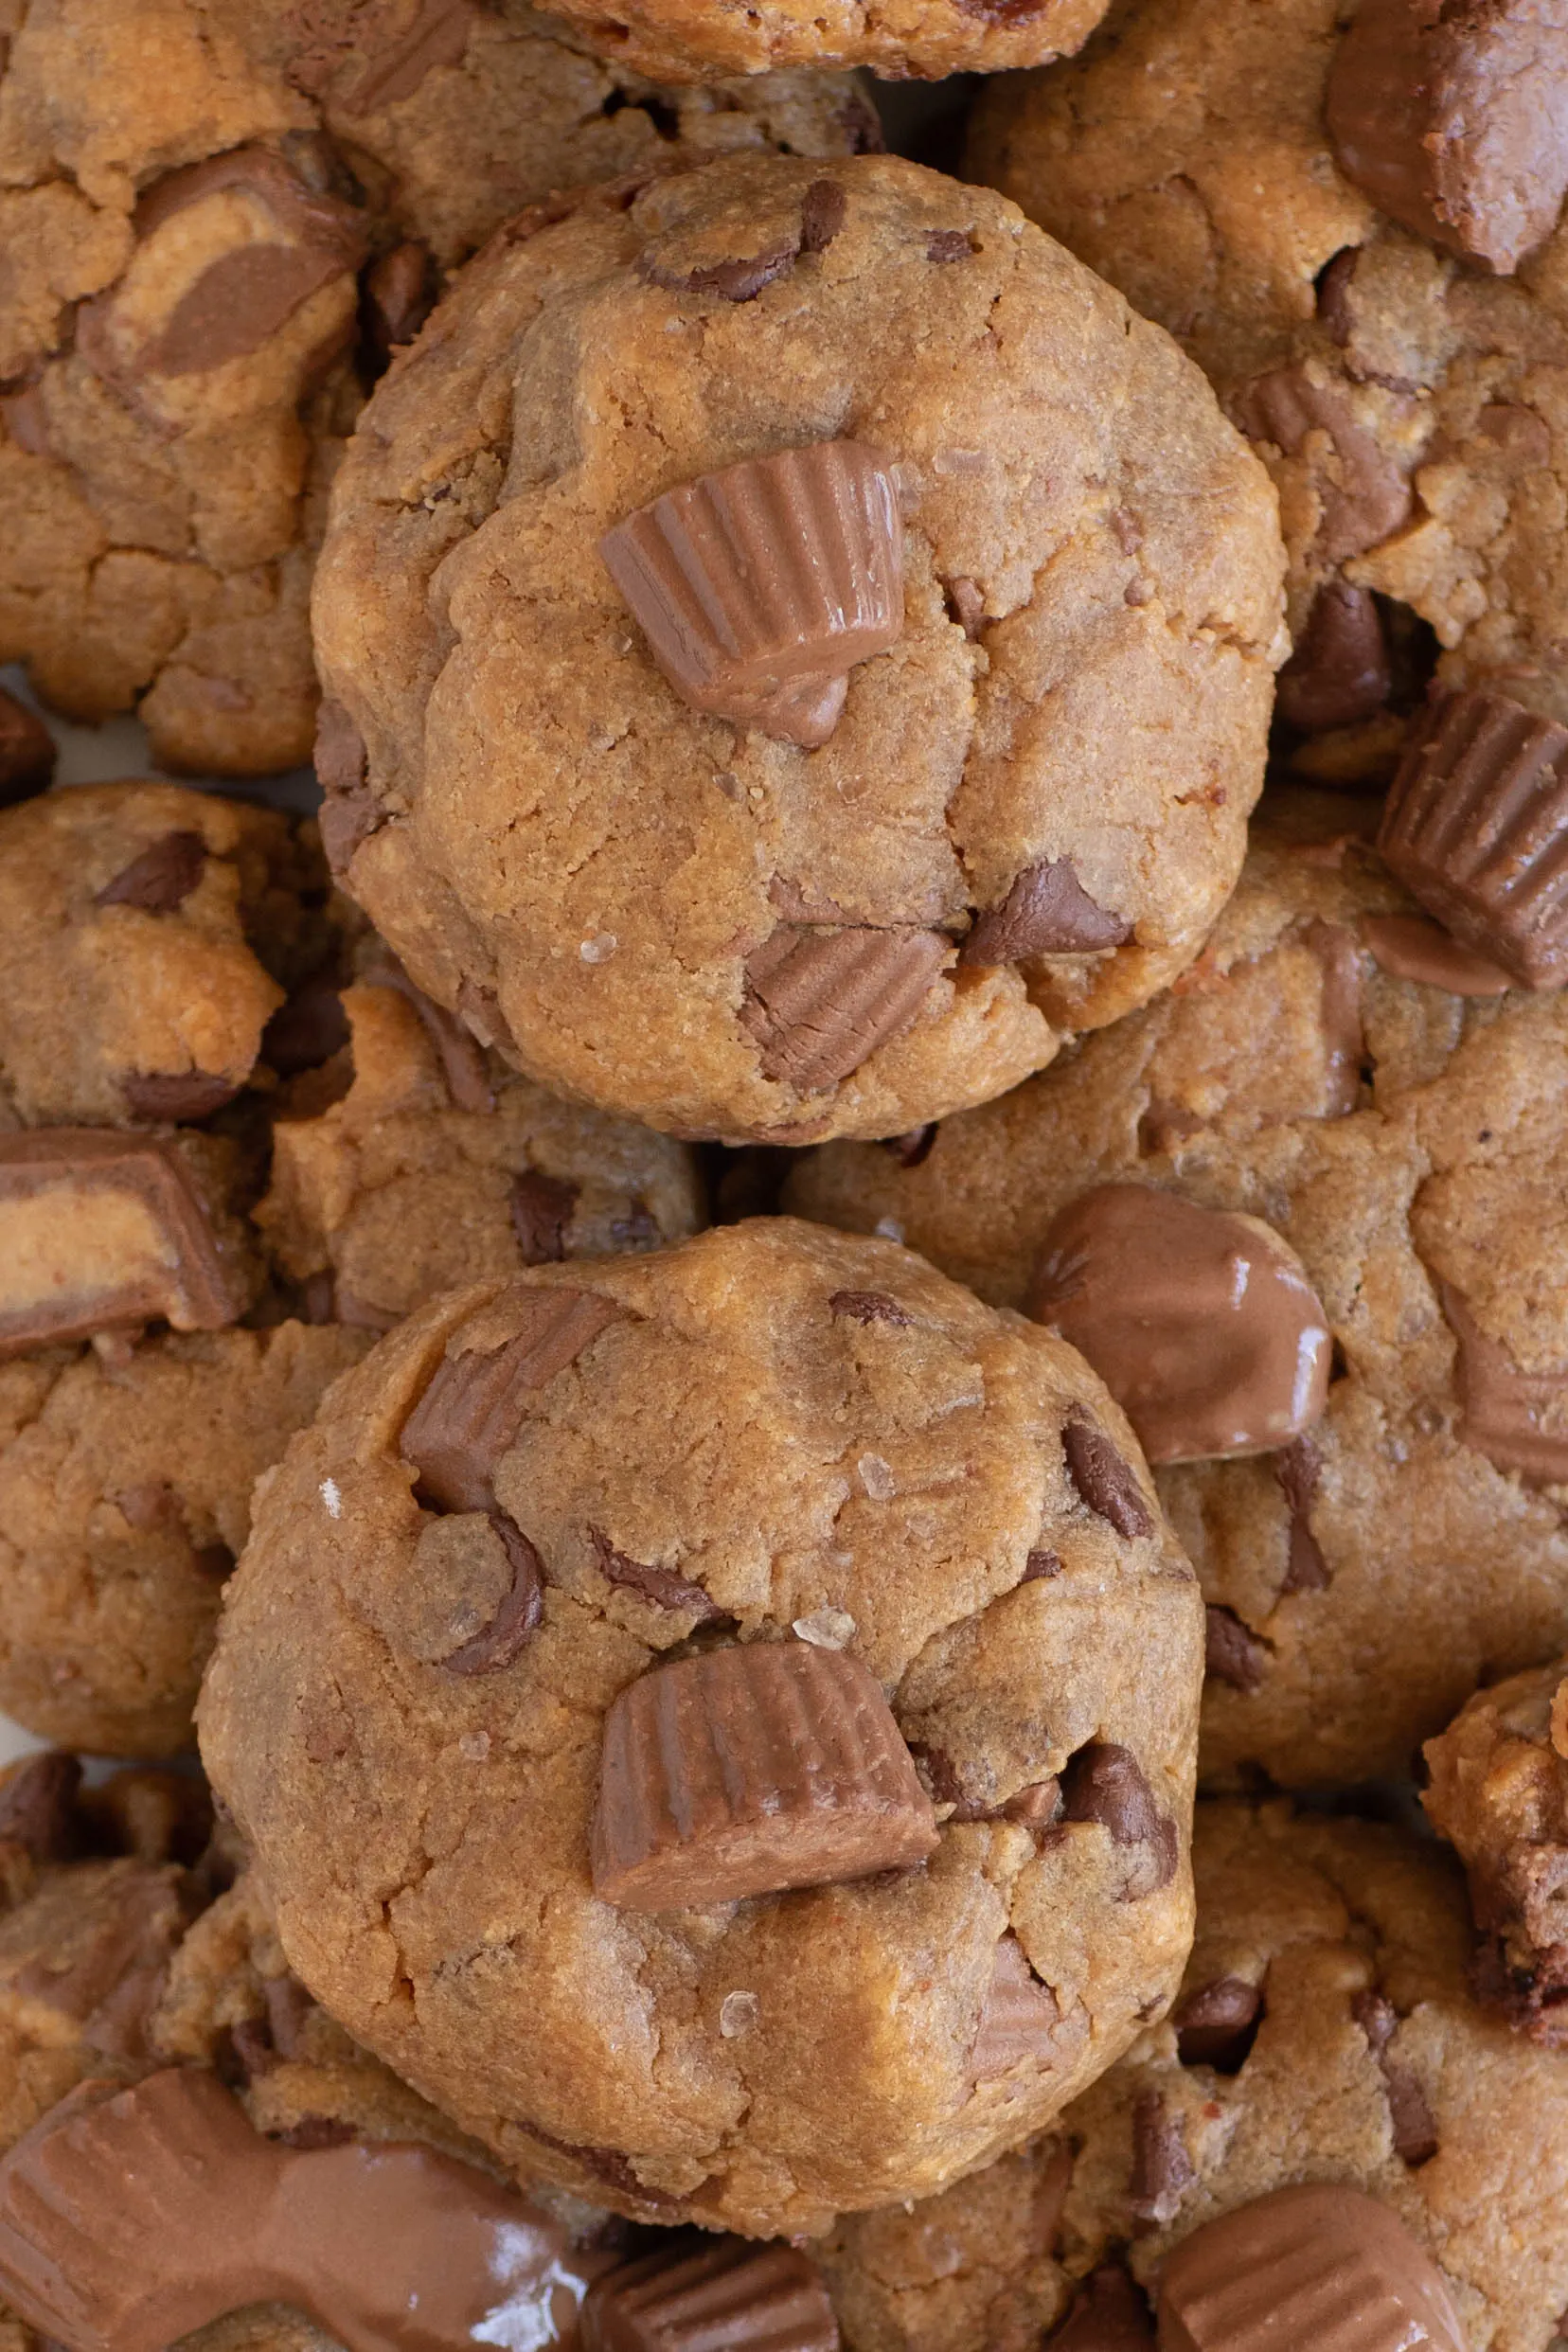 over the top view of lots of peanut butter cup cookies